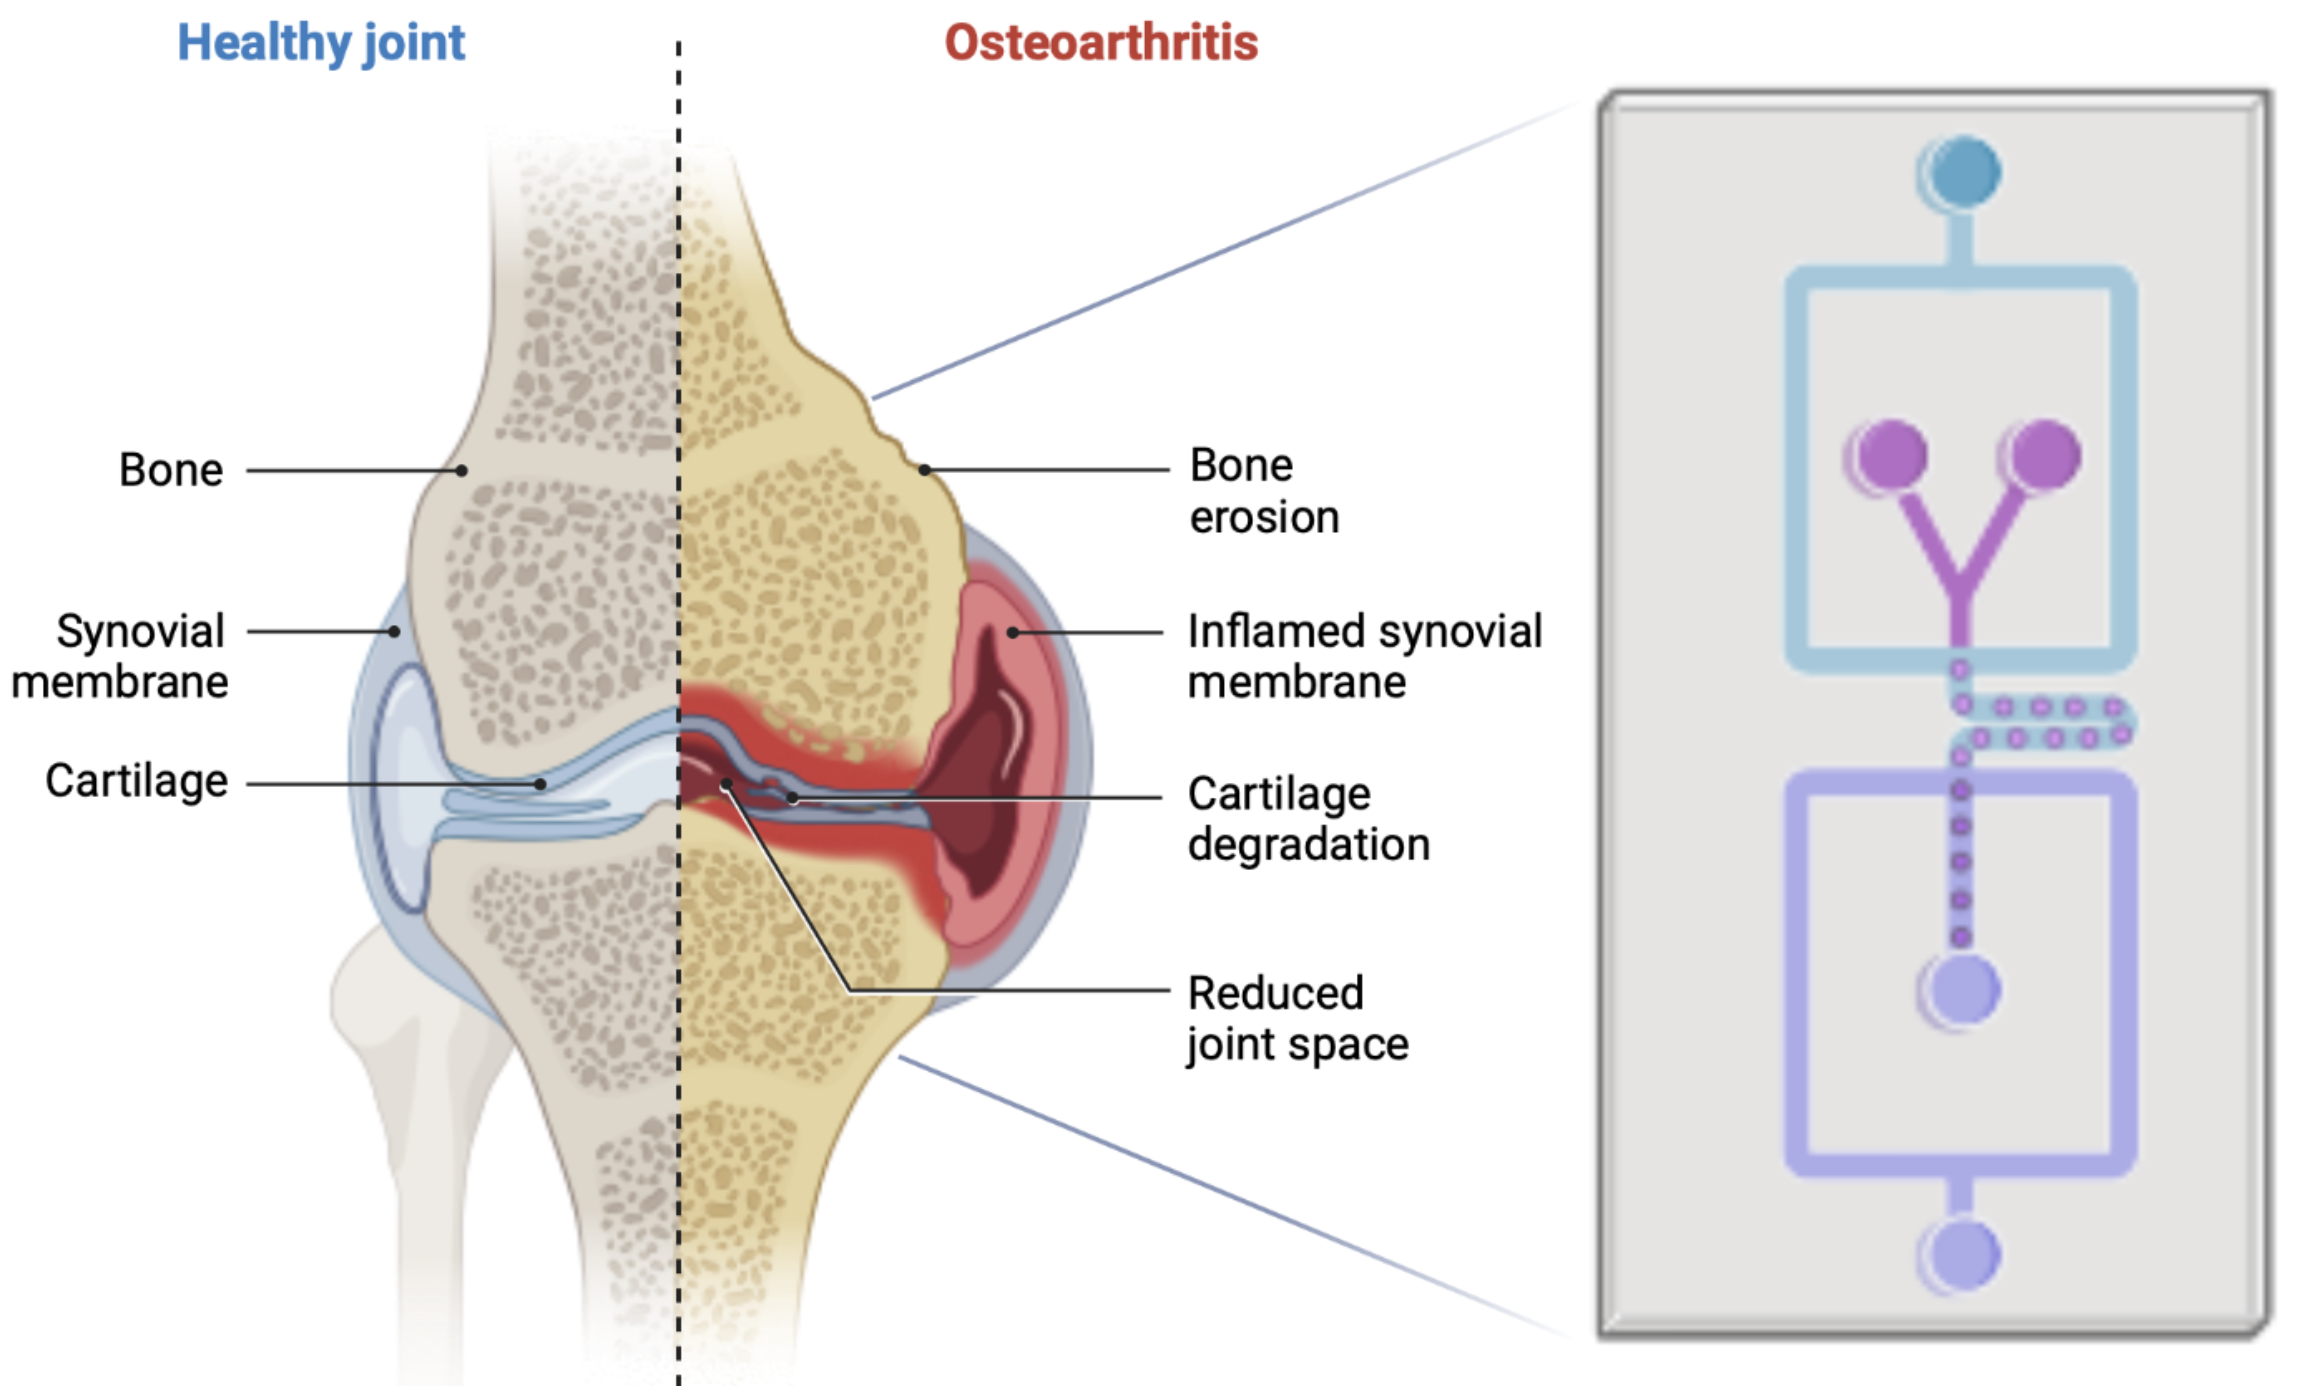 Development of an Actuated Human-Engineered Cartilage-on-Chip Model for Investigating Joint development and Osteoarthritis Pathophysiology